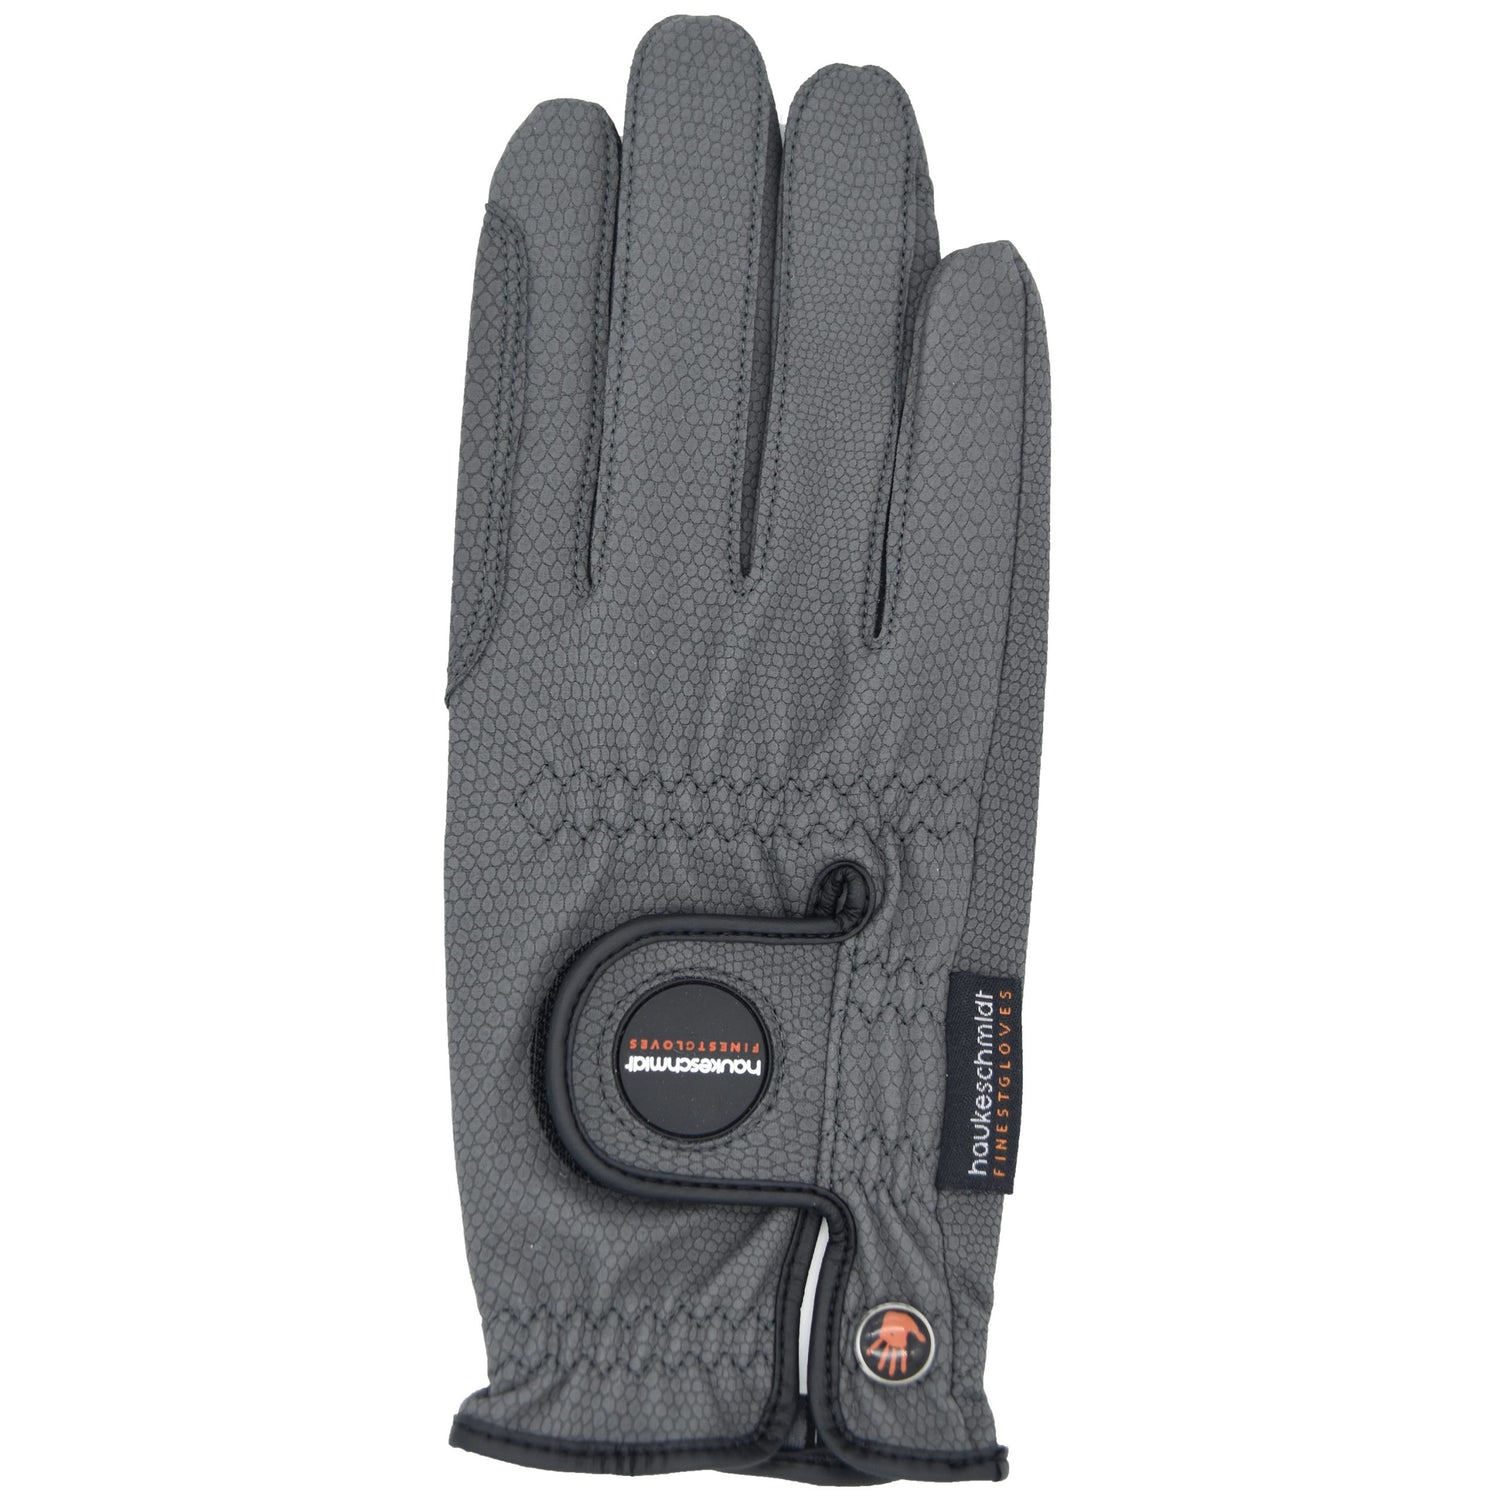 A Touch of Class Riding Gloves grey New